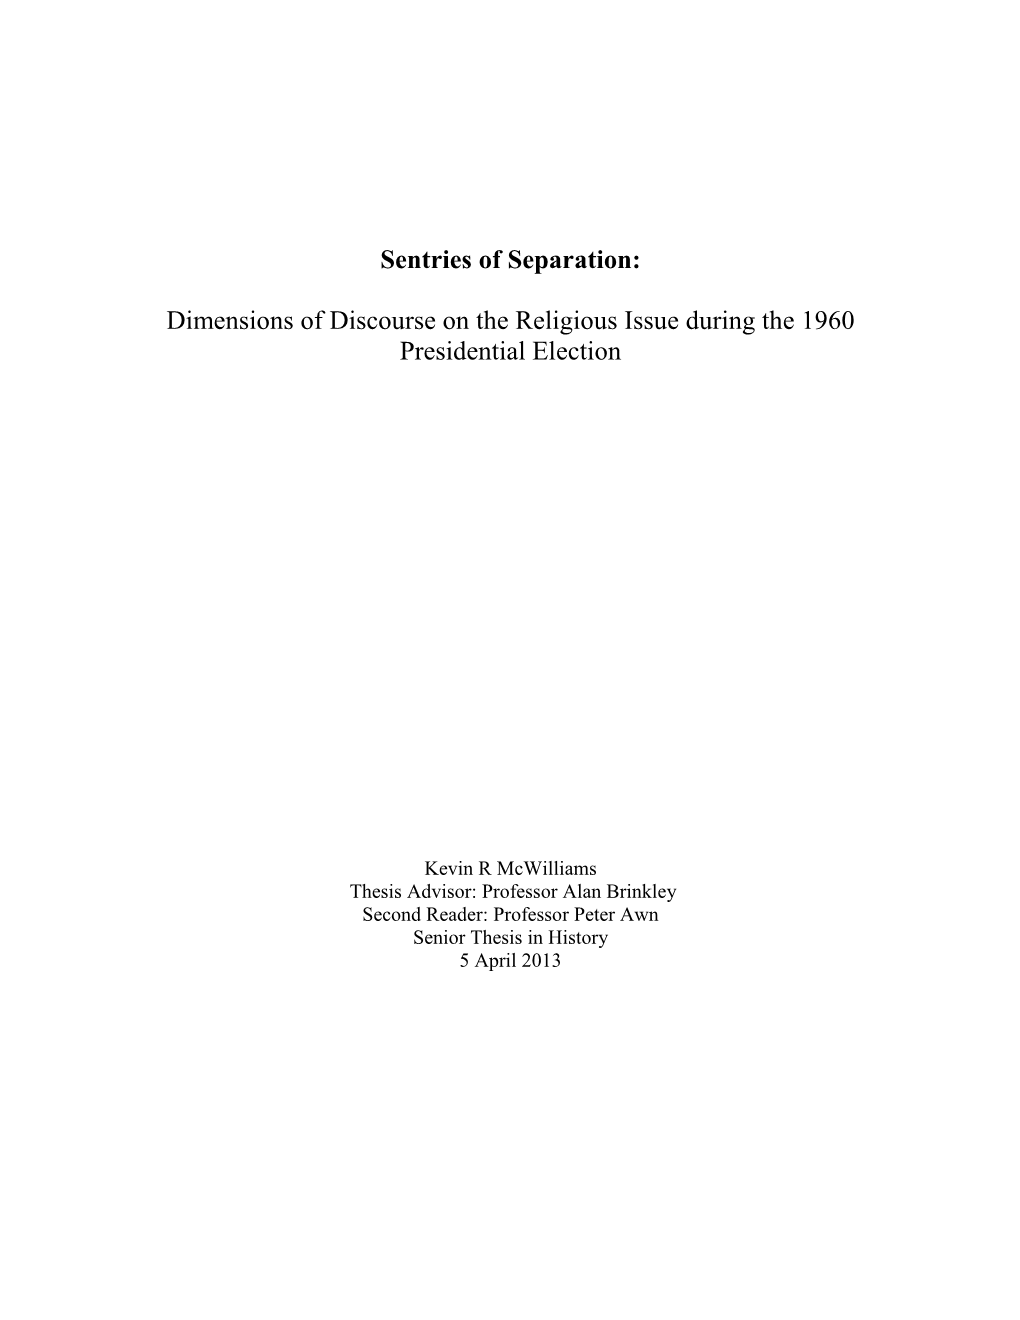 Dimensions of Discourse on the Religious Issue During the 1960 Presidential Election